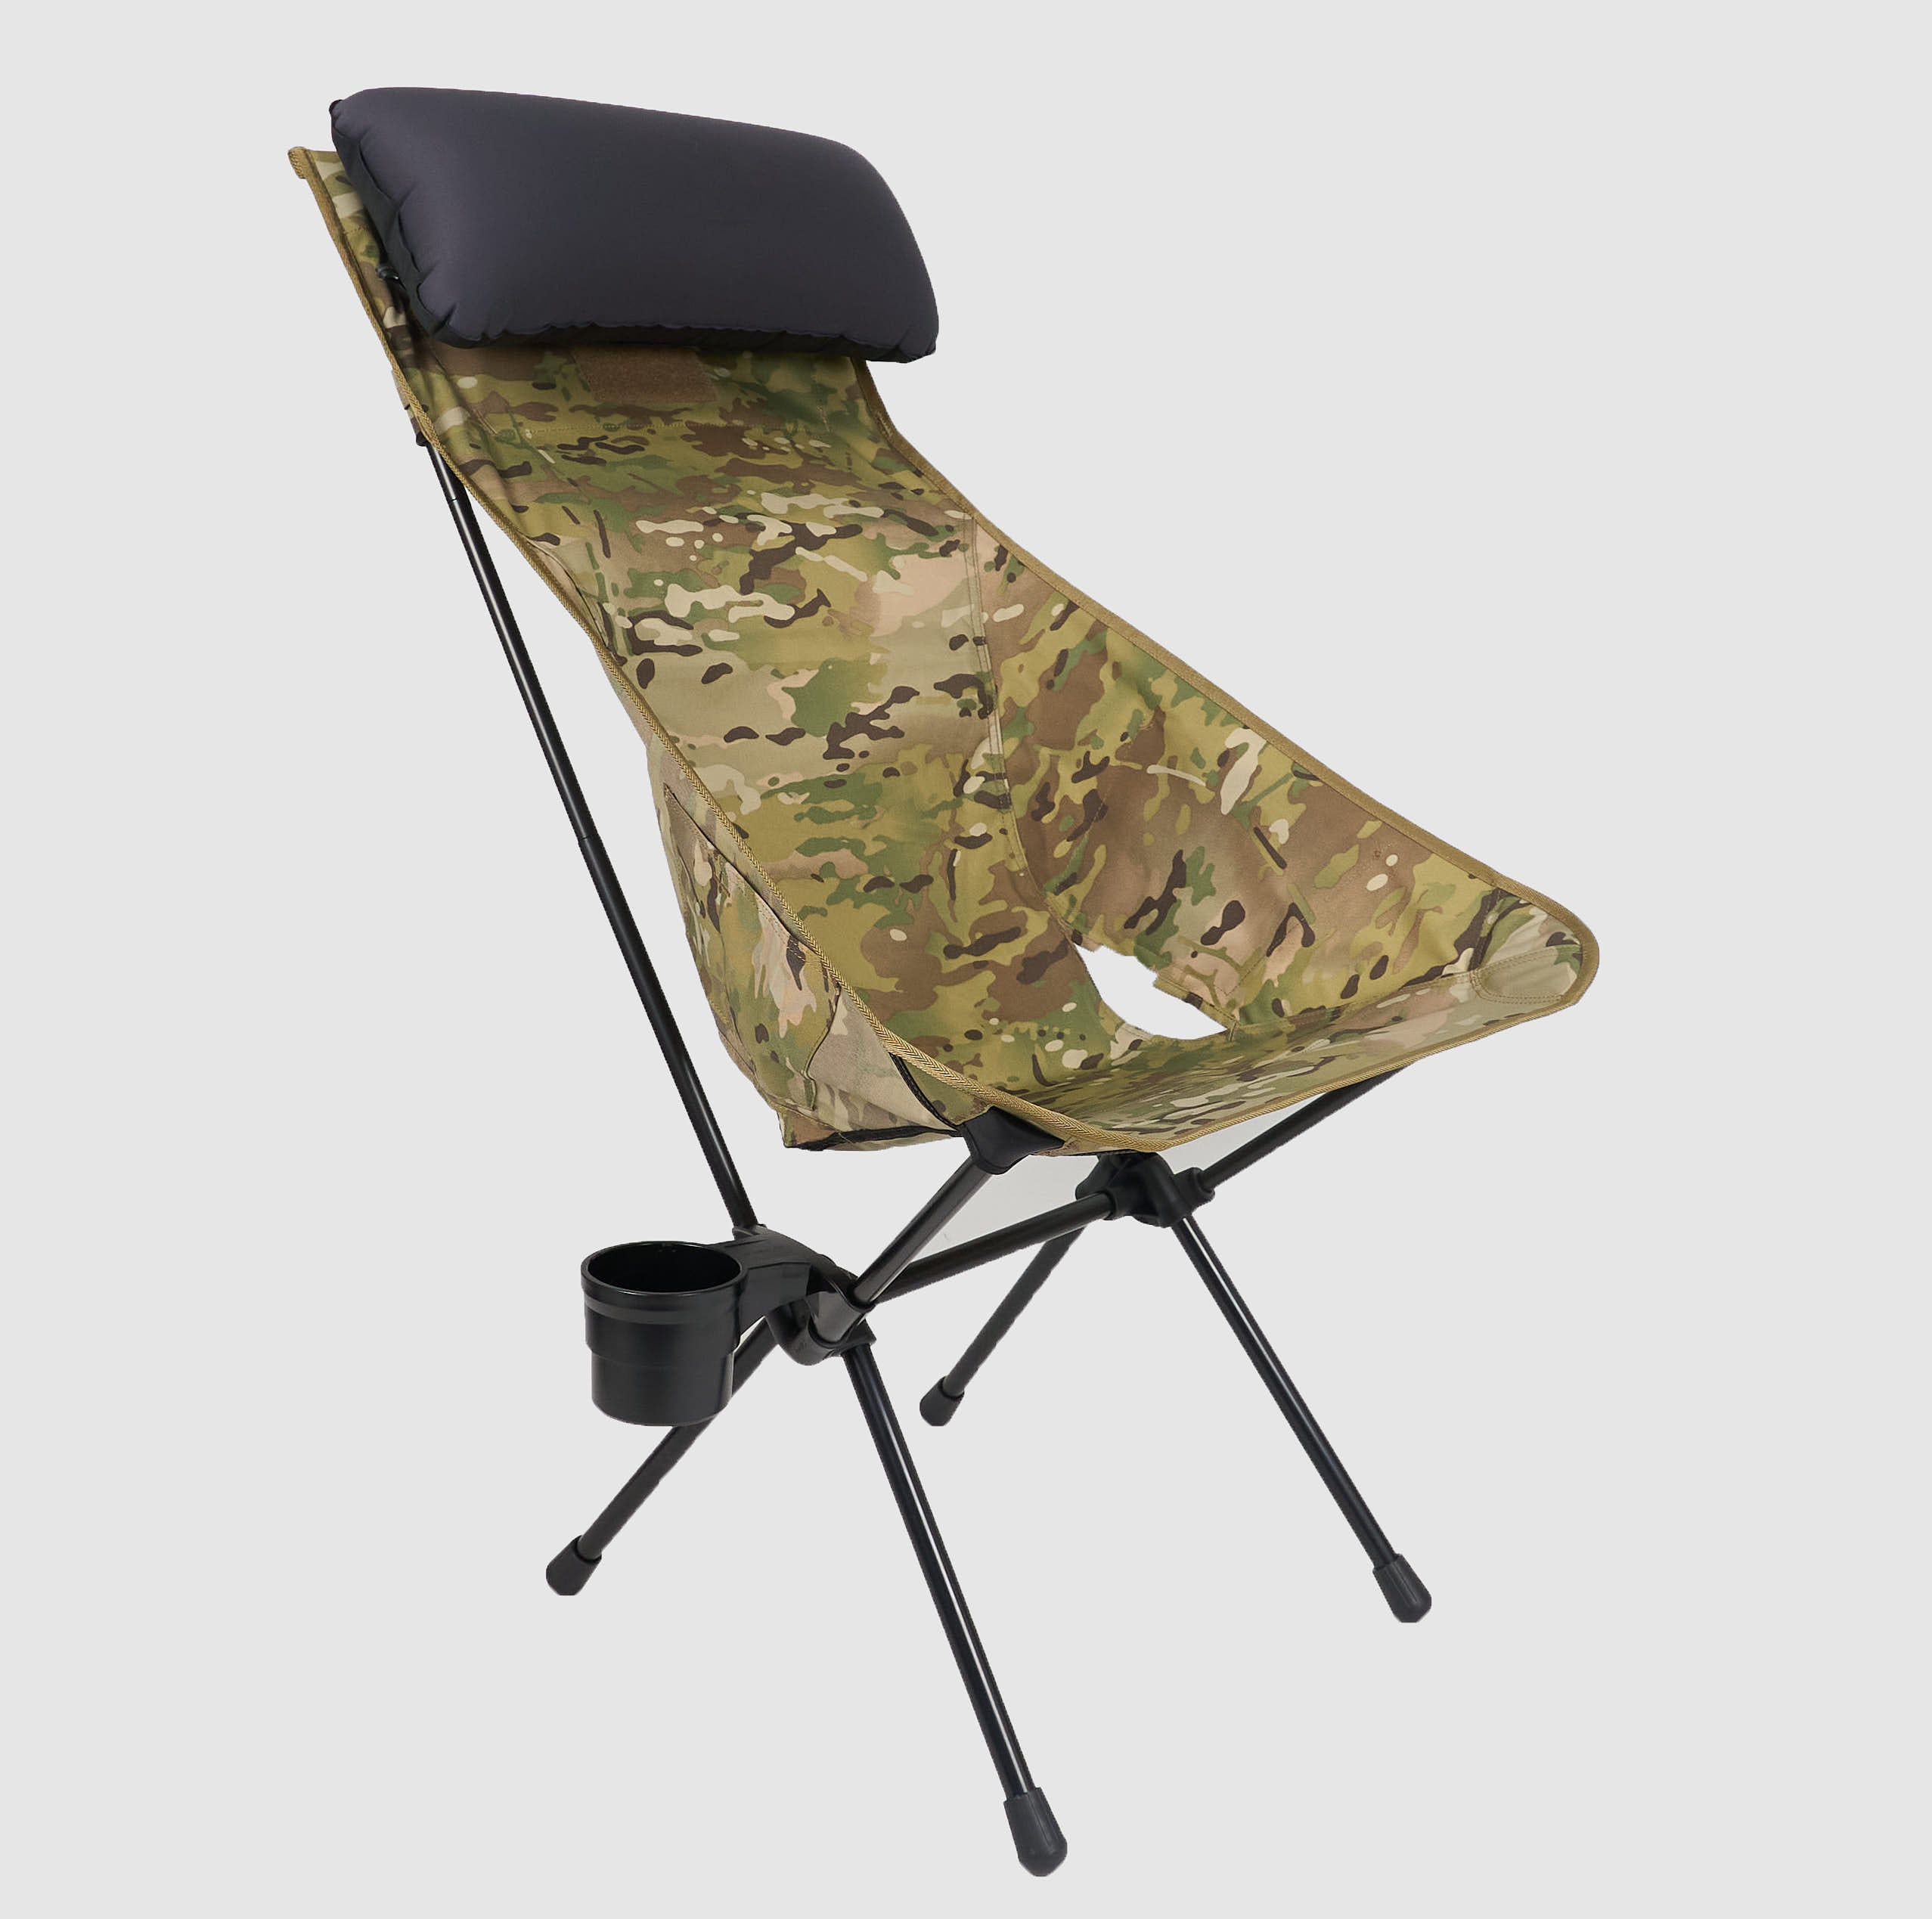 Helinox Tactical Camping Chair Limited Edition - DeeCee style